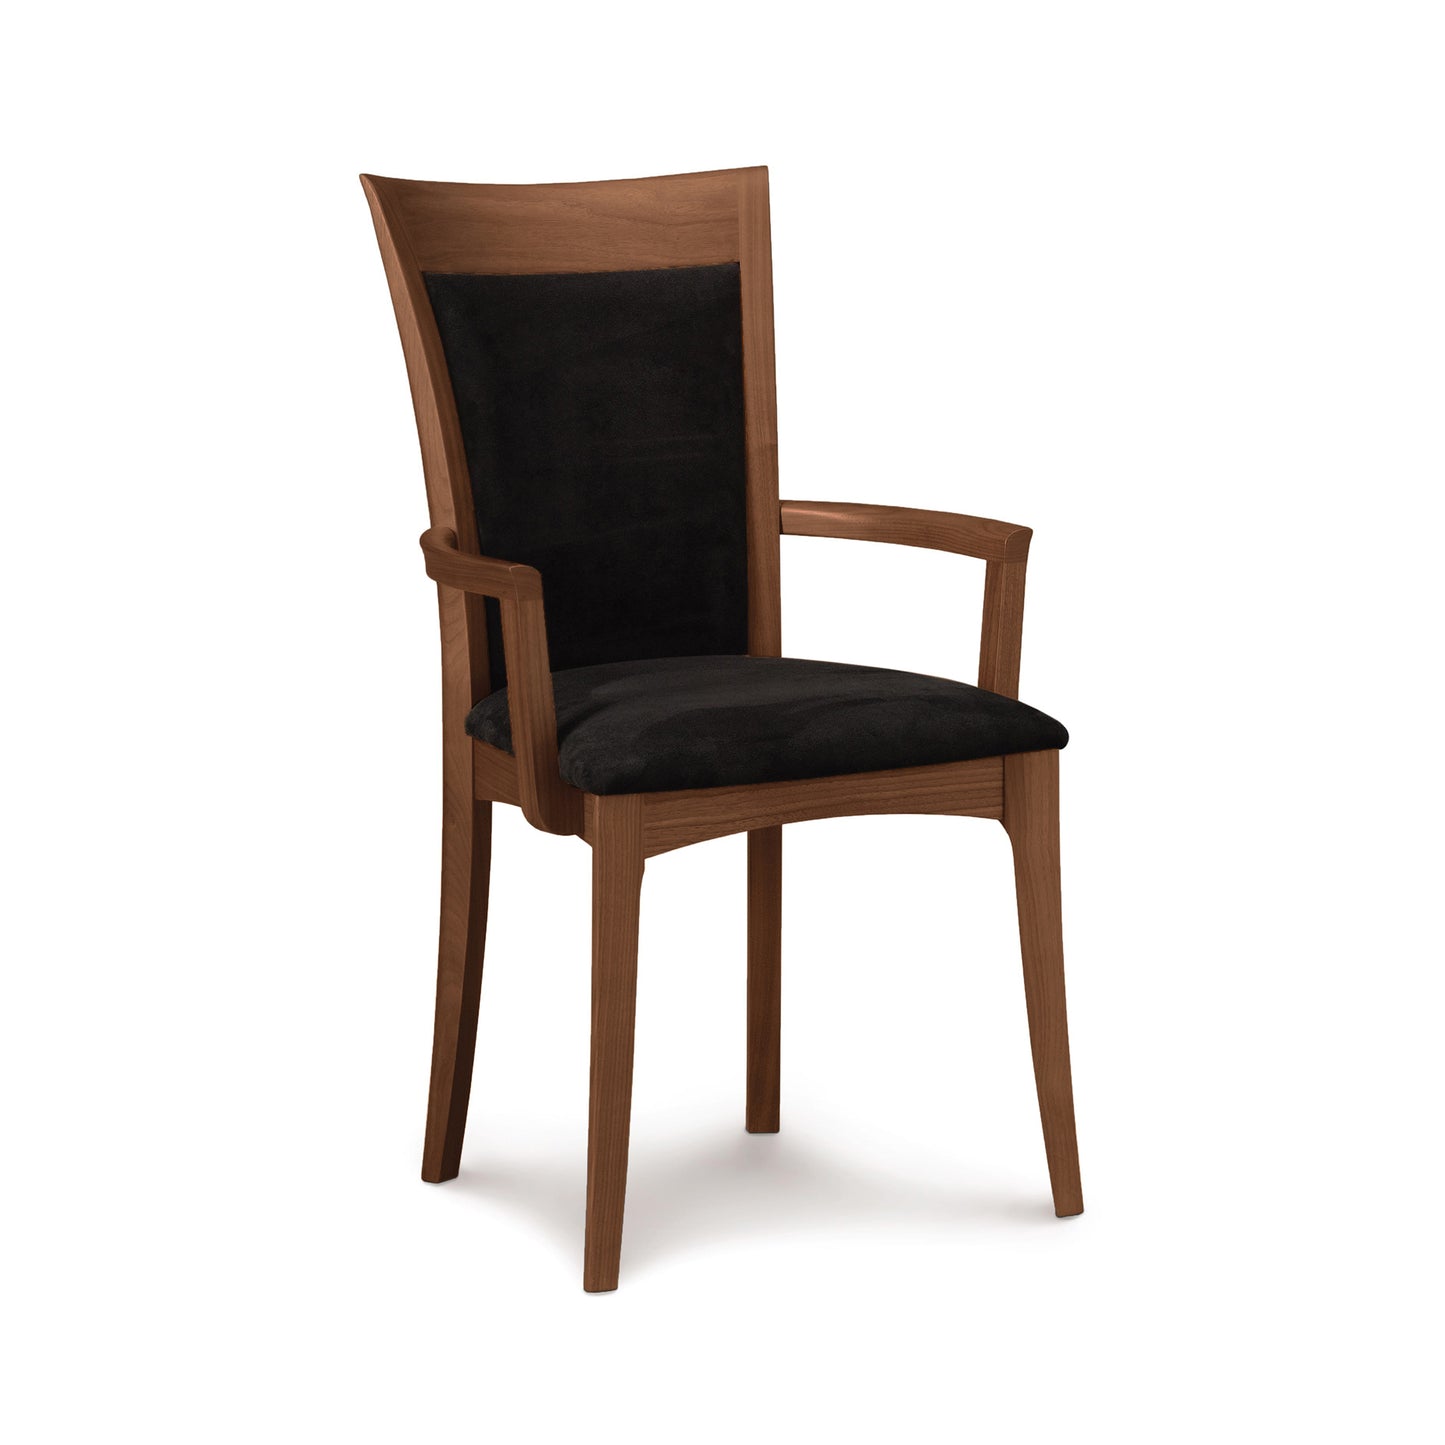 A Morgan Shaker Chair by Copeland Furniture with a dark upholstered seat and backrest, isolated against a white background.